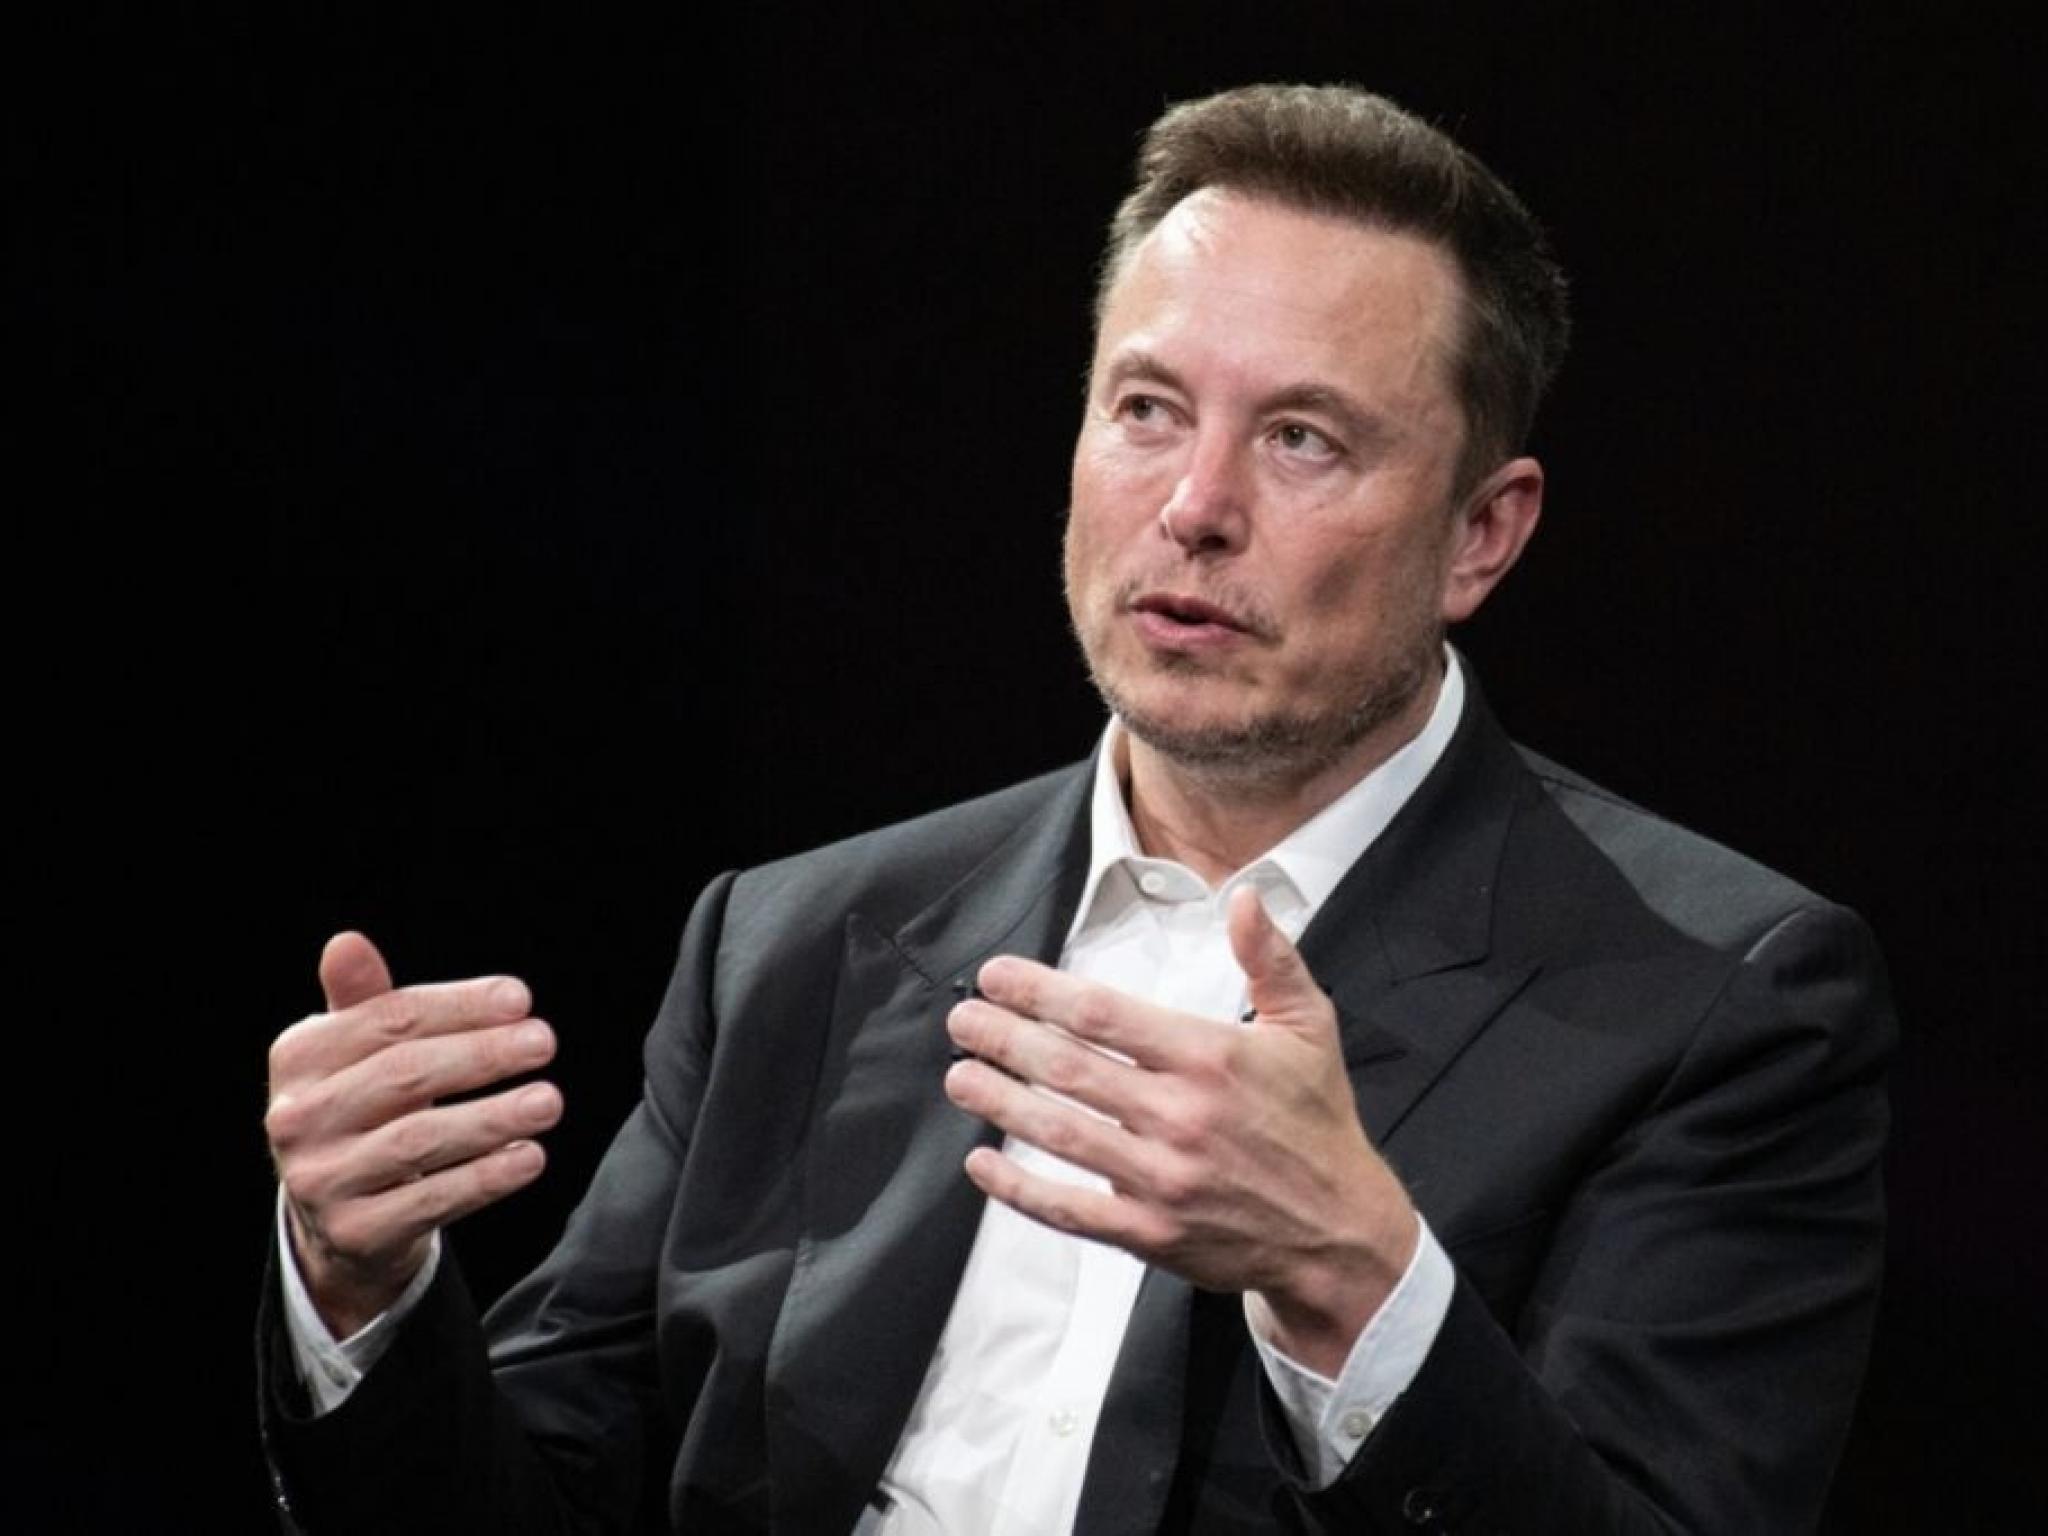  musk-urges-tesla-shareholders-to-vote-says-too-much-of-the-stock-market-is-controlled-by-iss-and-glass-lewis-zero-economic-alignment-with-actual-shareholders 